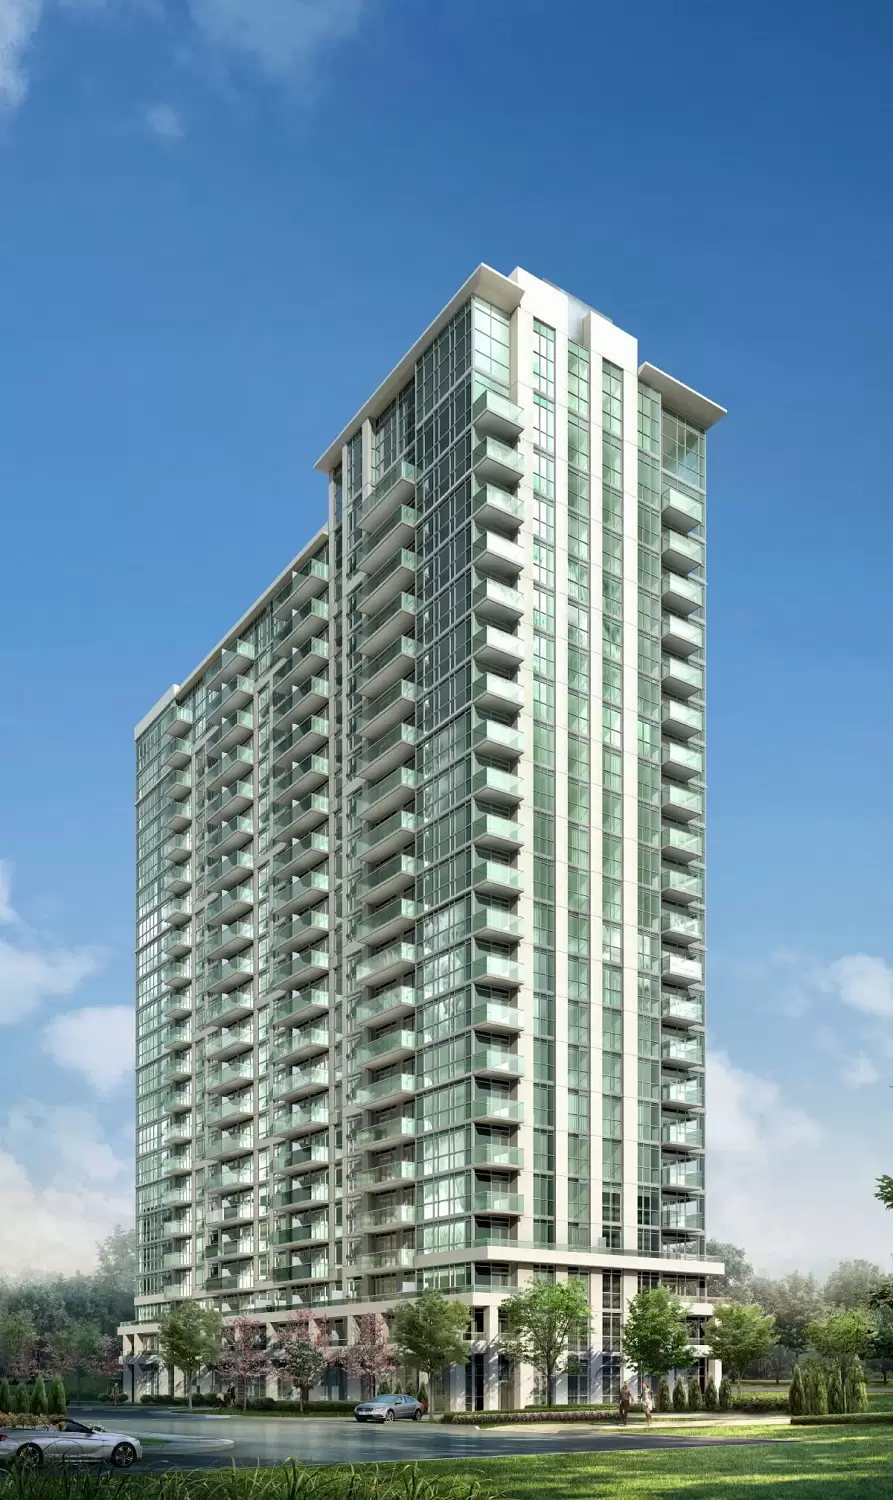 Aspire Condos is a new high rise condo complex by The Conservatory Group located in 355 Rathburn Road West, Mississauga, ON.